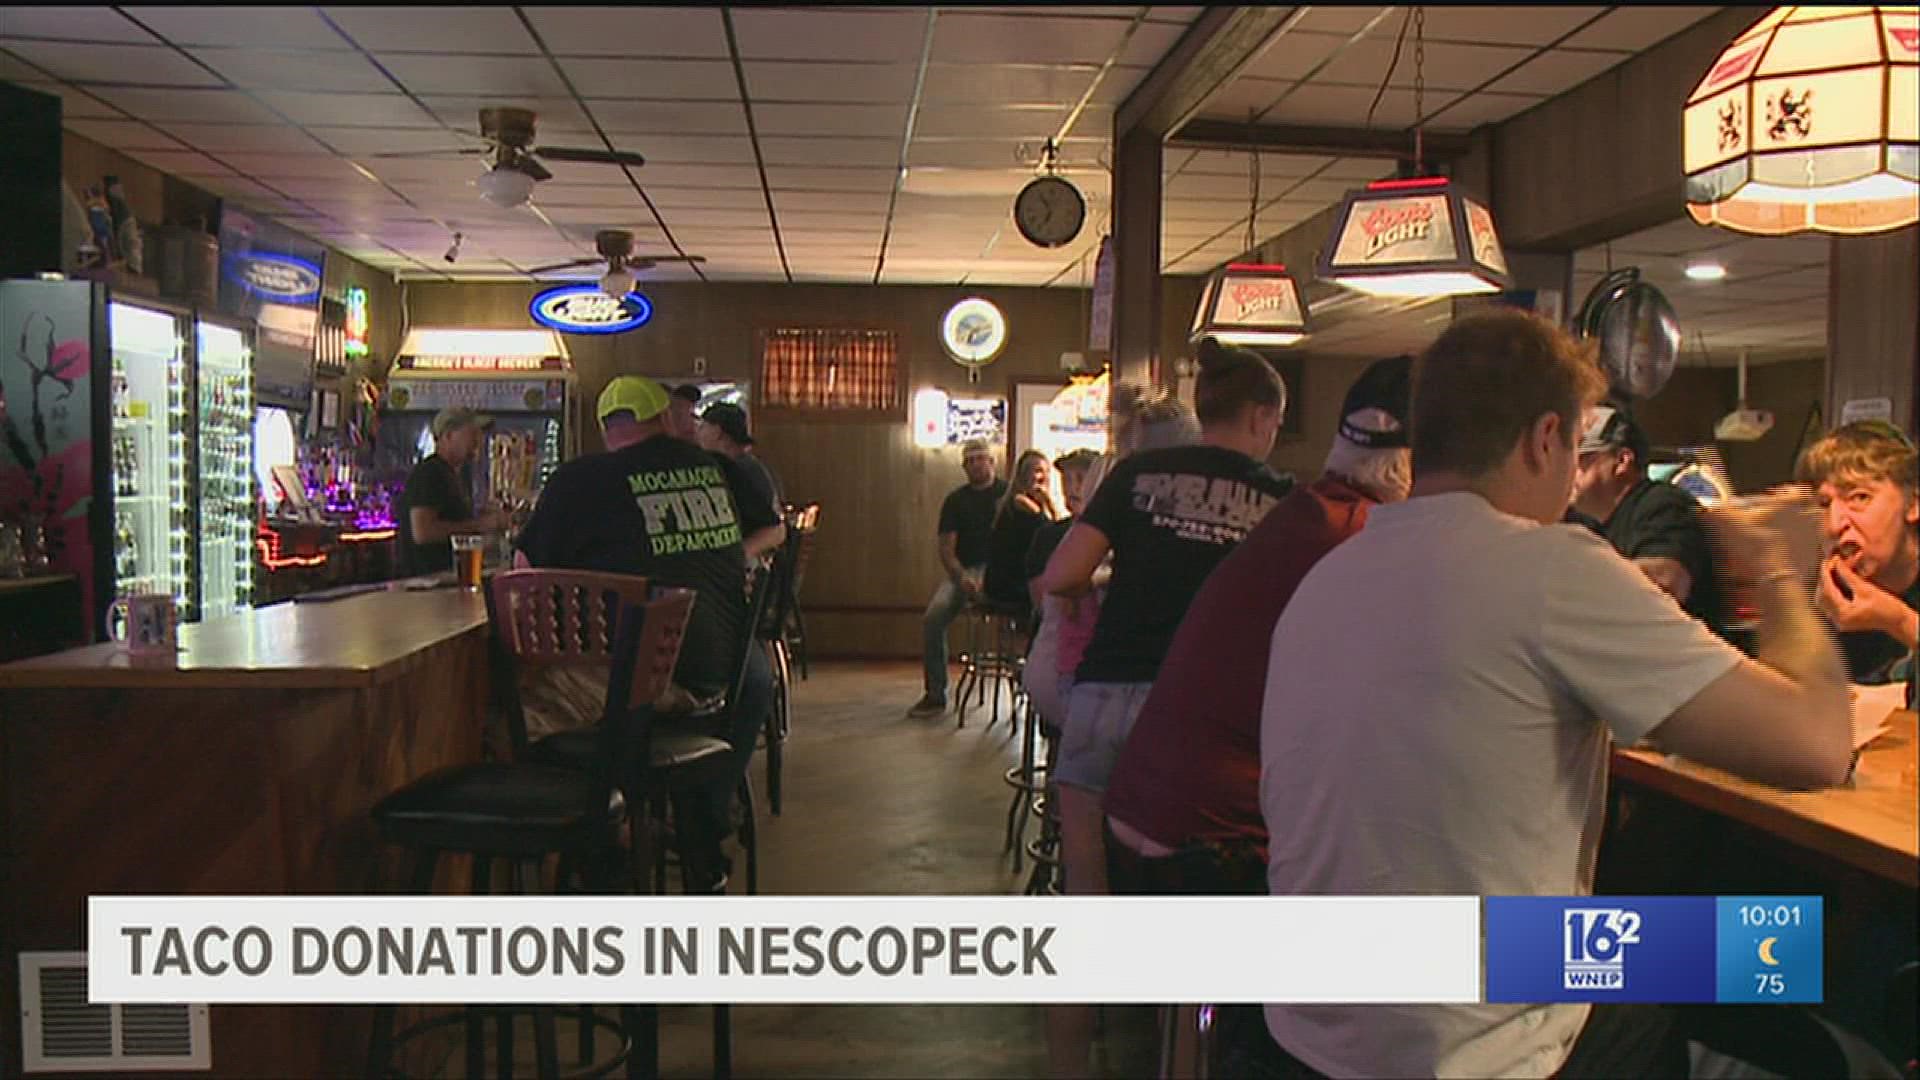 All tips from Thursday's sales are also going to be donated to help the victims of last week's fire in Nescopeck.